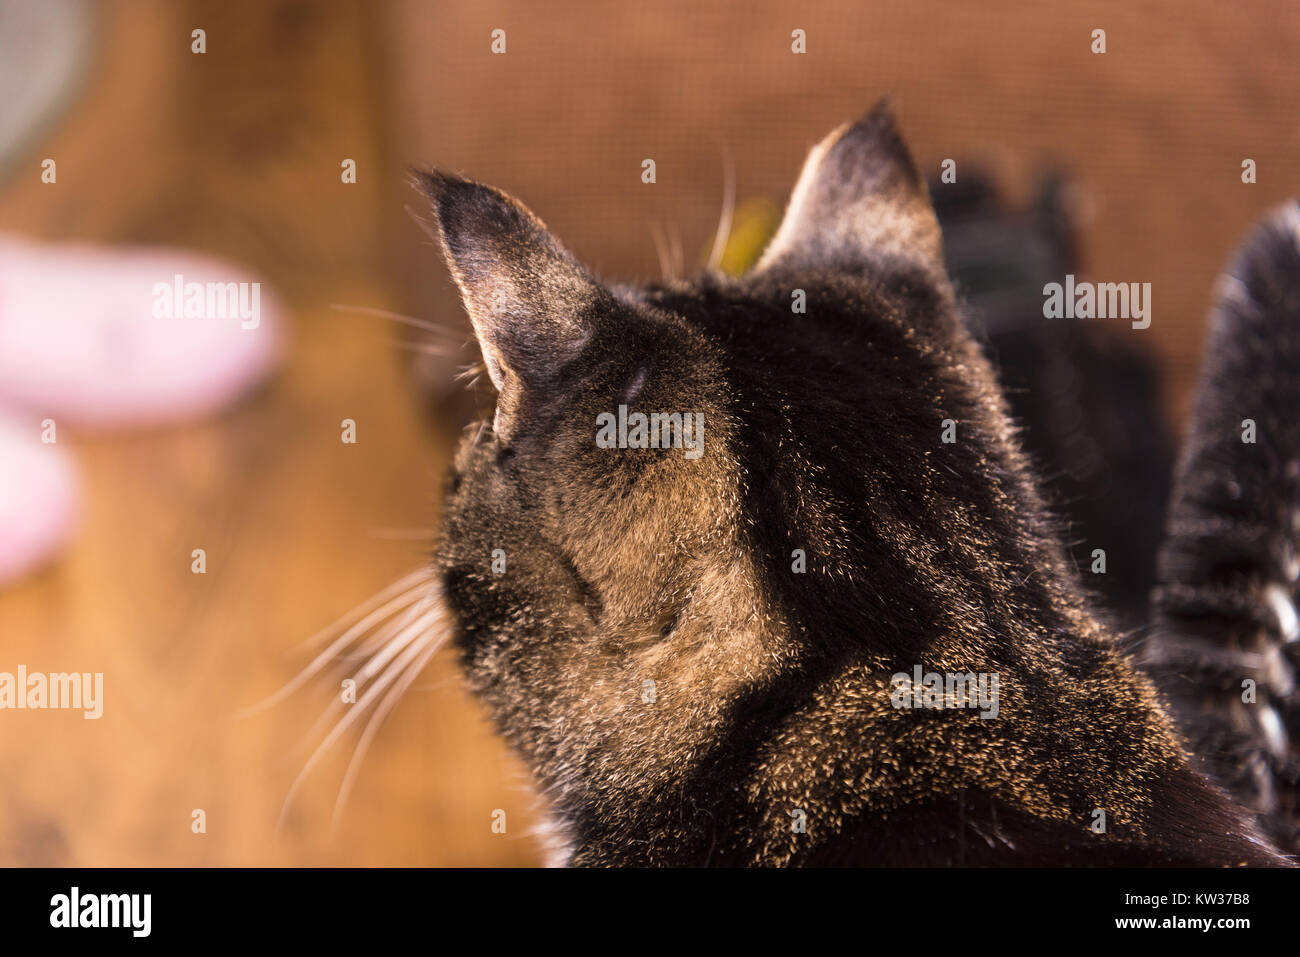 The back of a tabby cat's head looking into it's warm home surrounded by a cat scratching stick cat's toy. Stock Photo